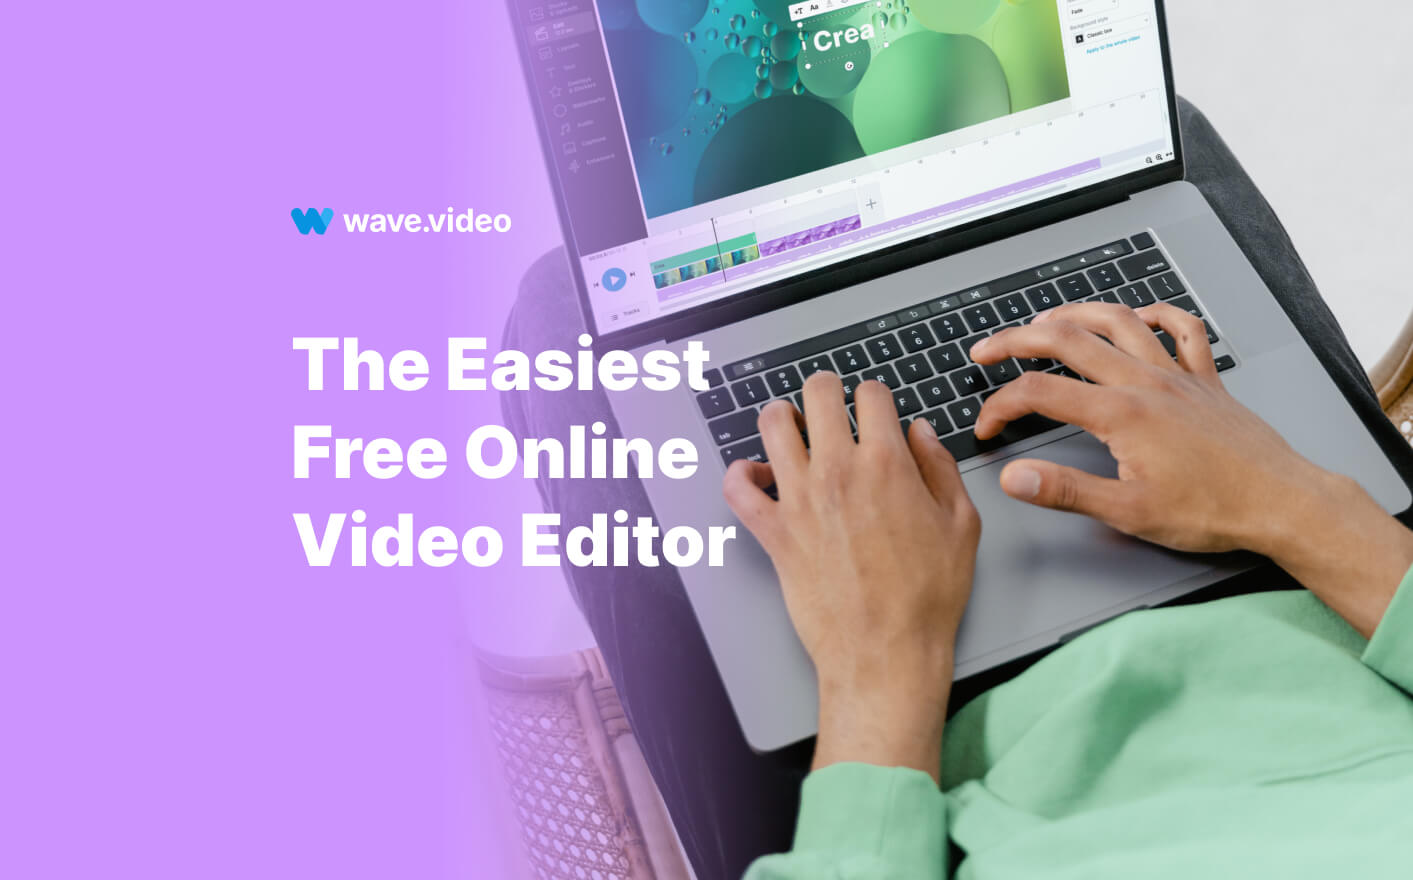 Free Online Video Editor for Easy Video Editing